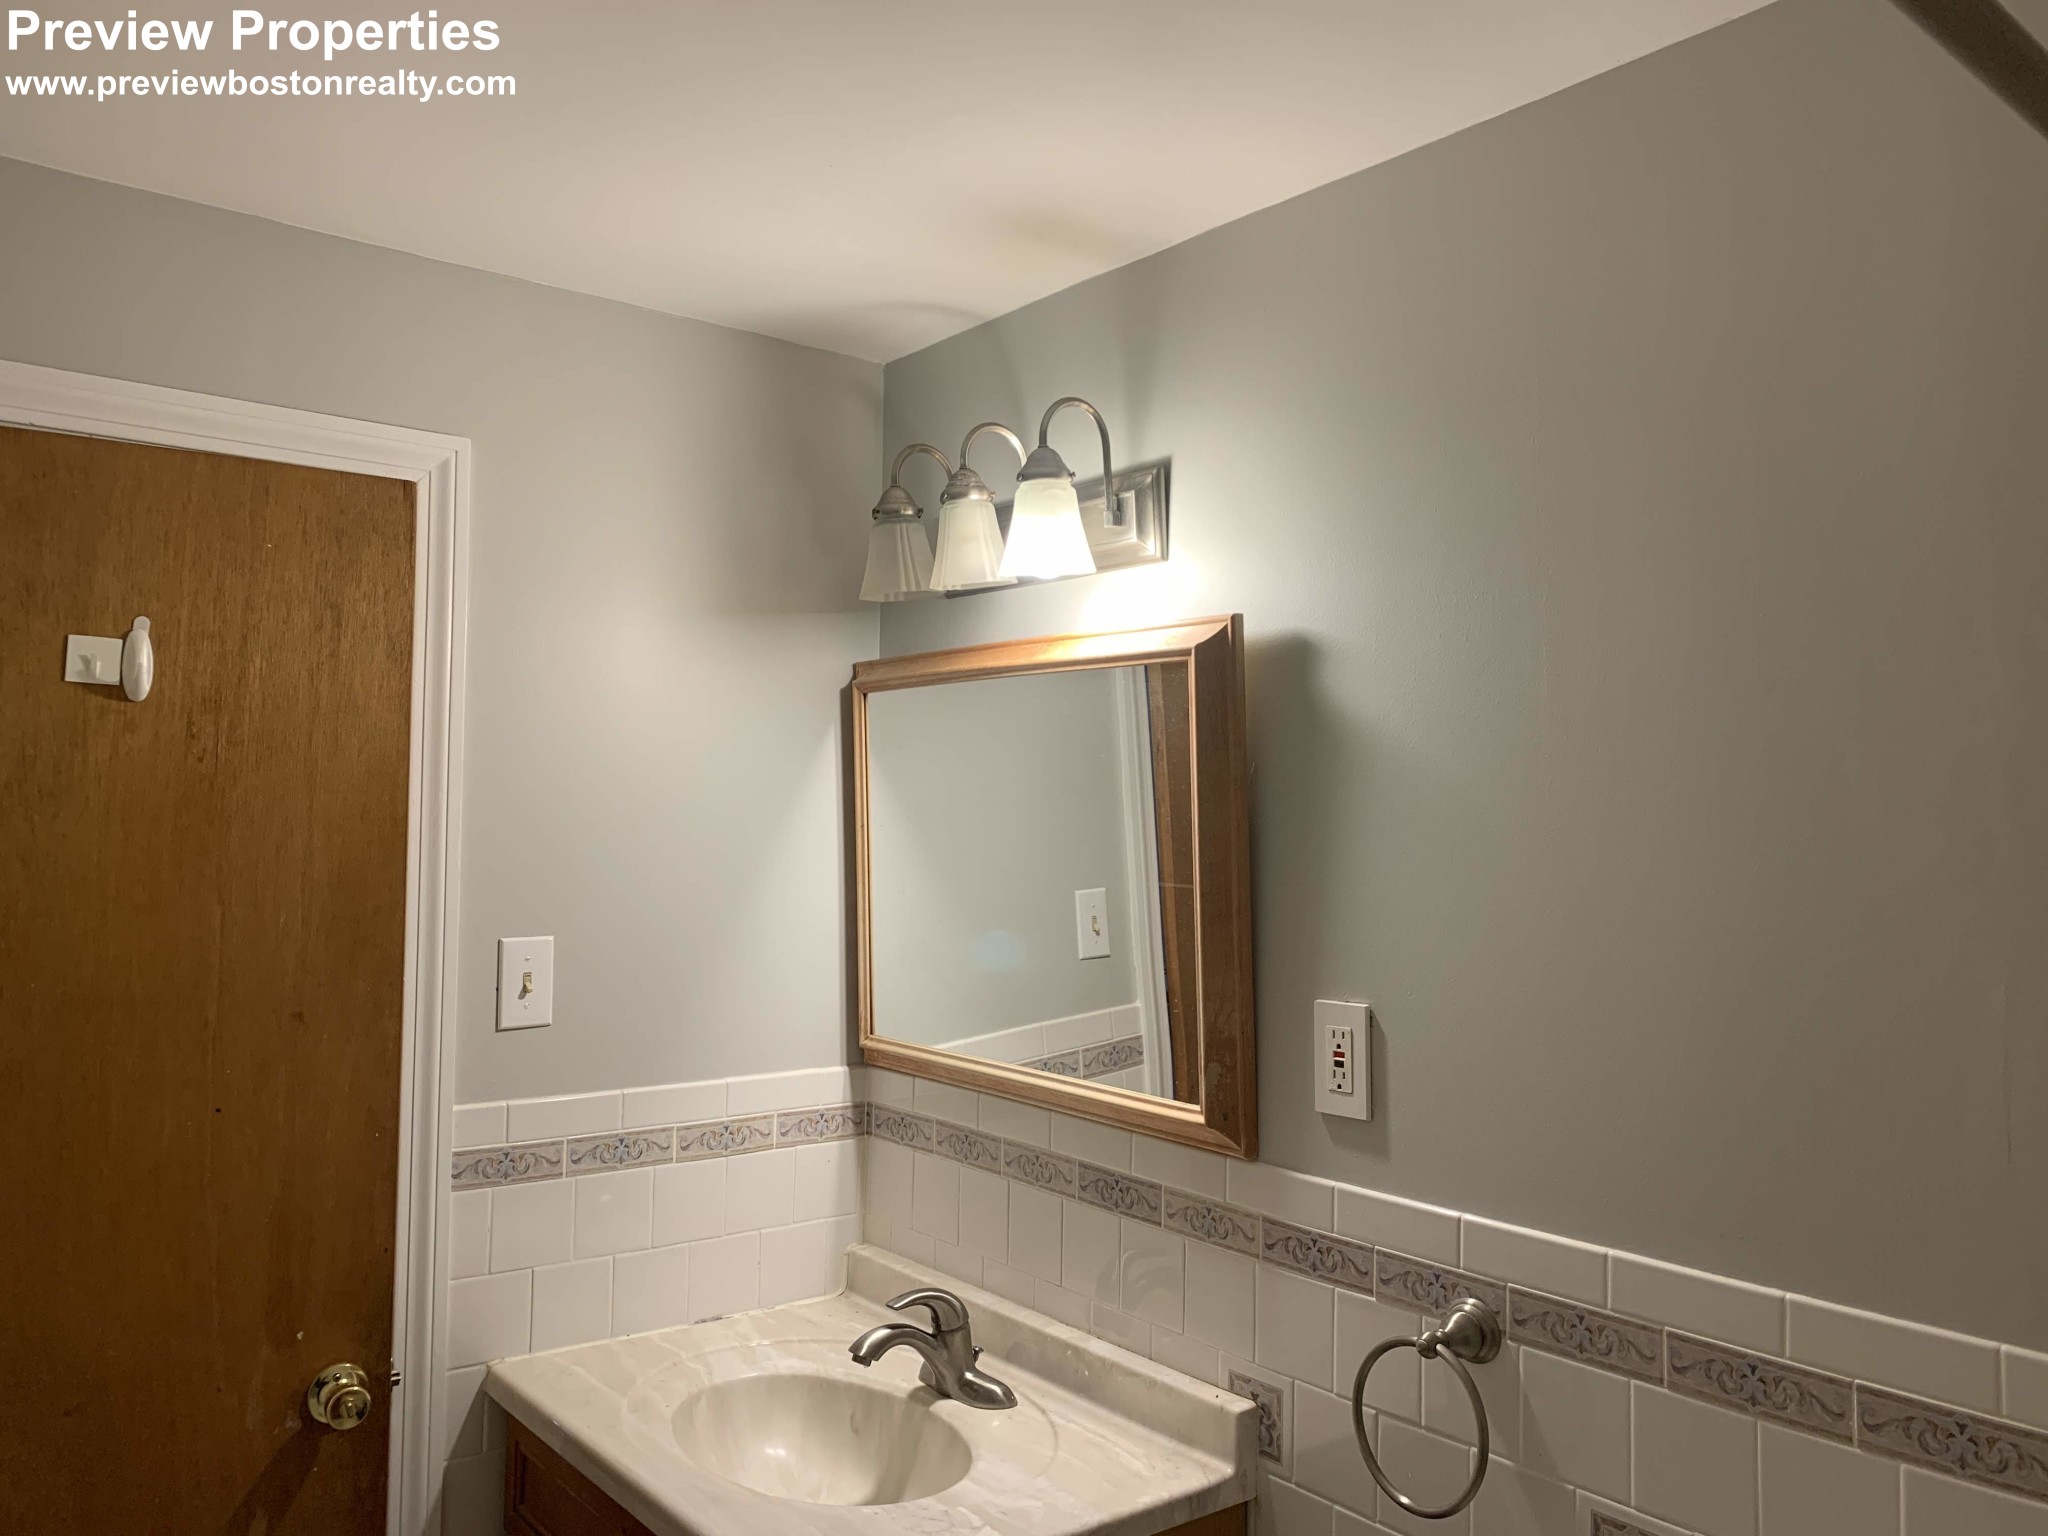 Photos of apartment on Warwick Rd.,Watertown MA 02472